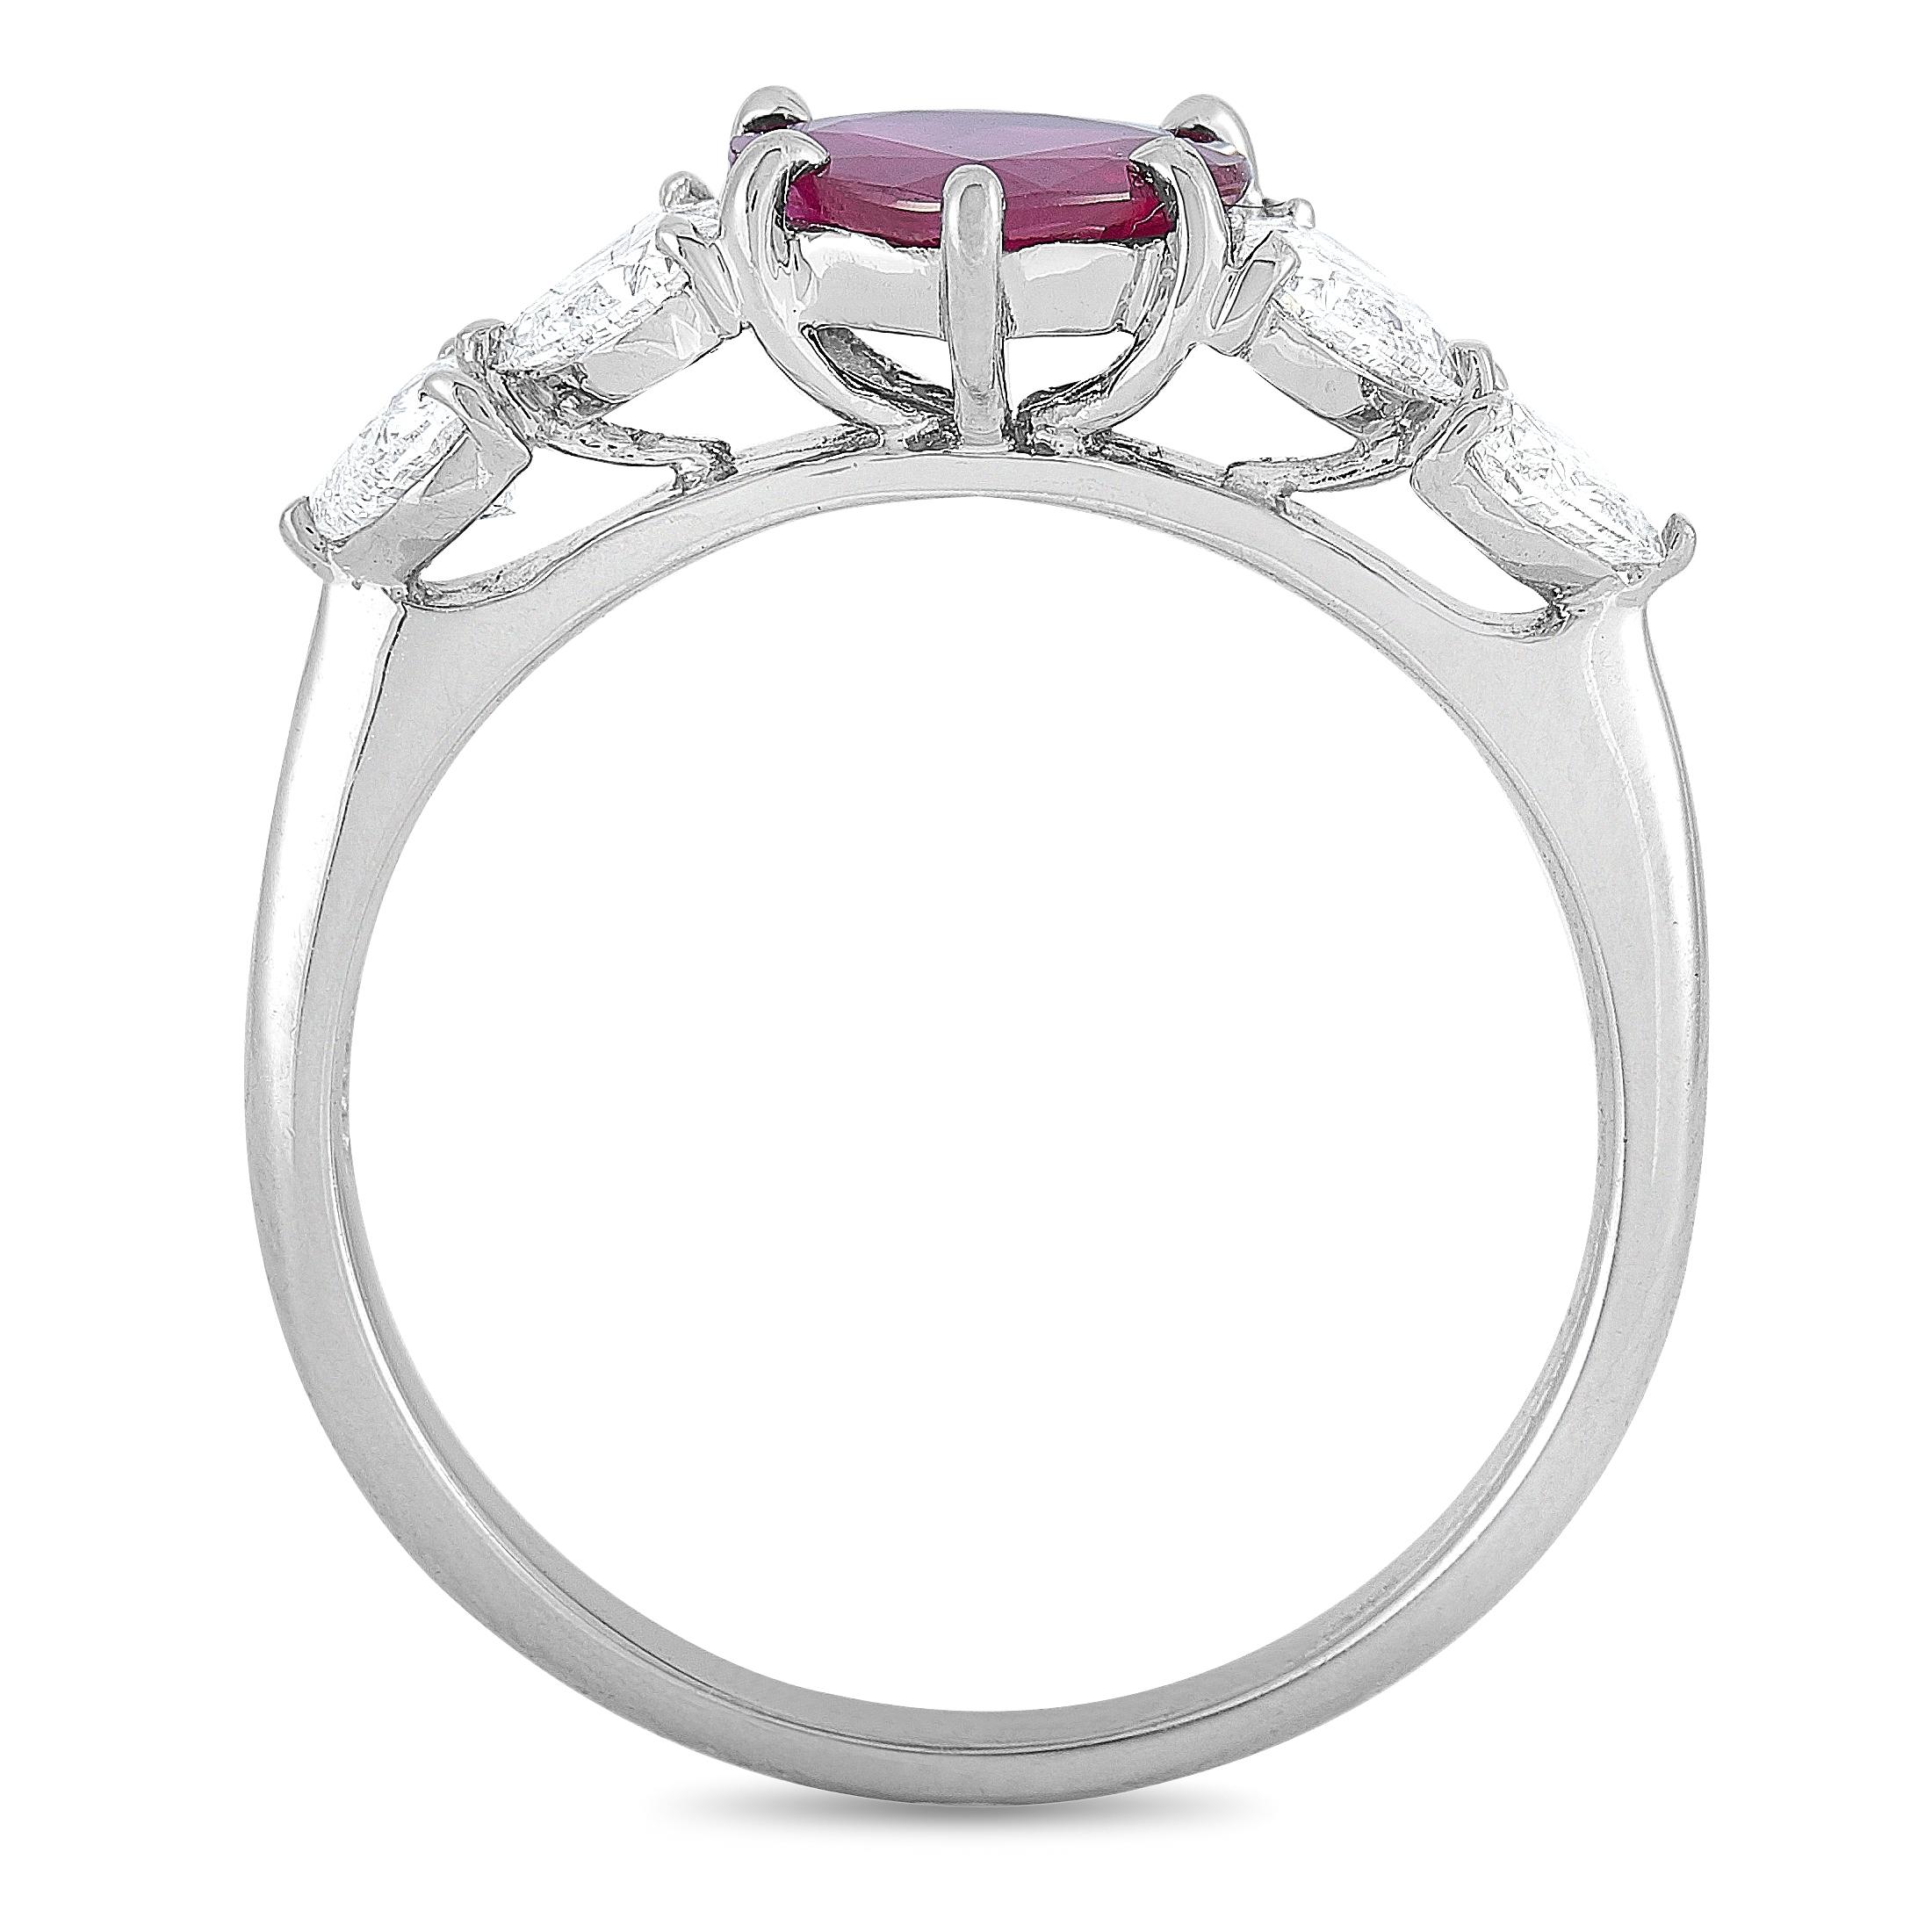 This LB Exclusive ring is crafted from platinum and weighs 5.1 grams, boasting band thickness of 2 mm and top height of 5 mm, while top dimensions measure 20 by 7 mm. The ring is set with a 1.30 ct heart-shaped ruby and a total of 0.85 carats of